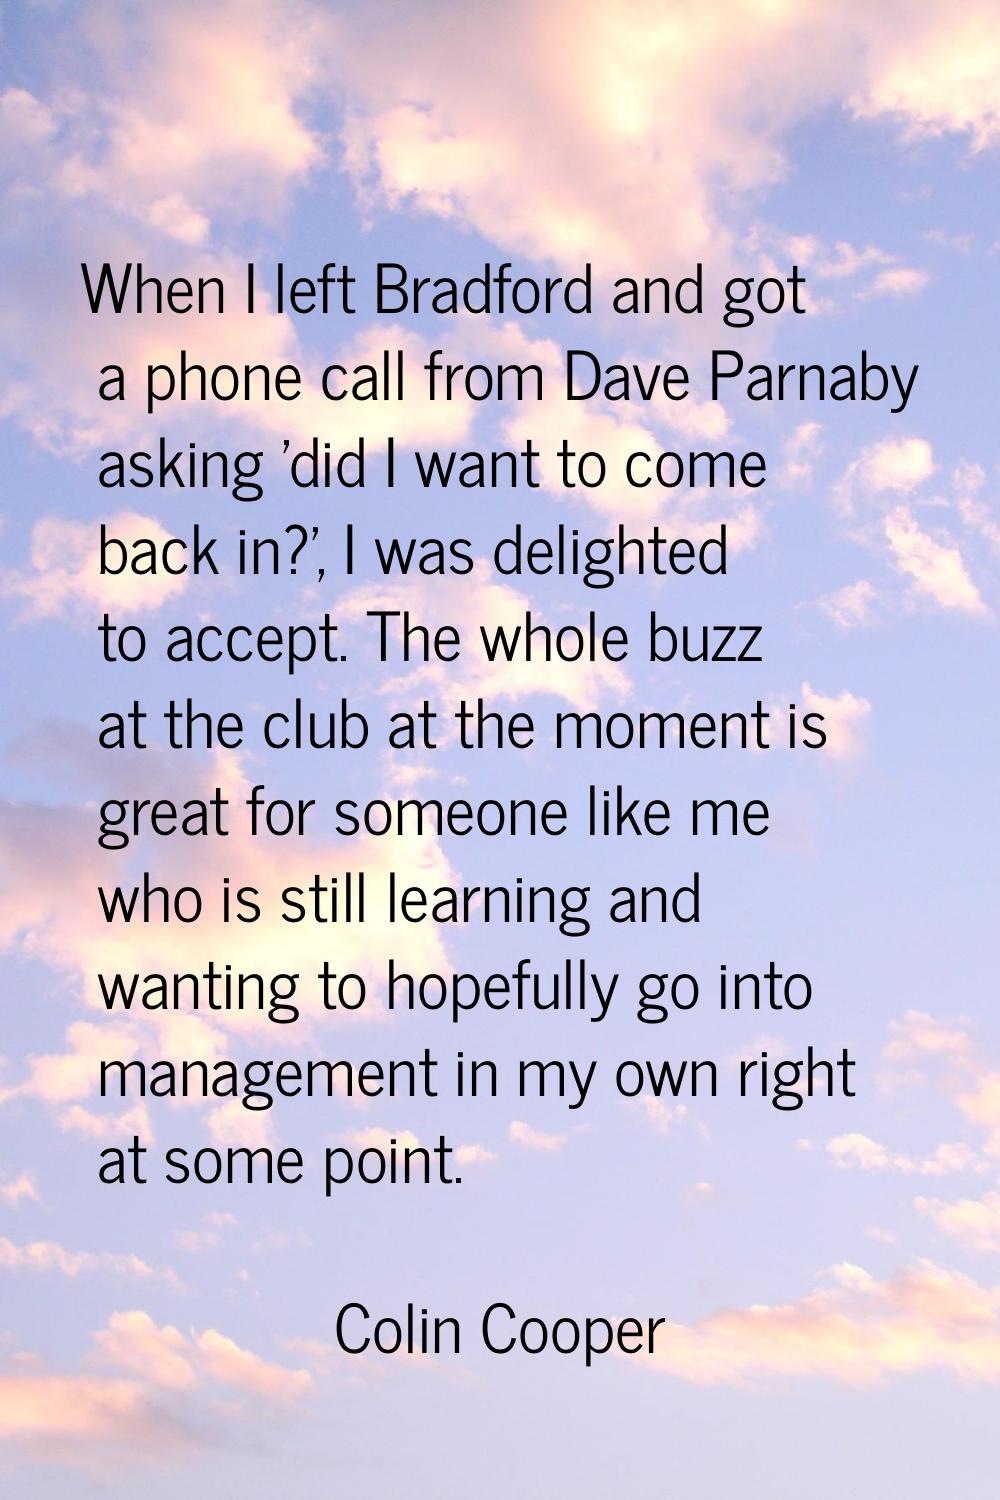 When I left Bradford and got a phone call from Dave Parnaby asking 'did I want to come back in?', I